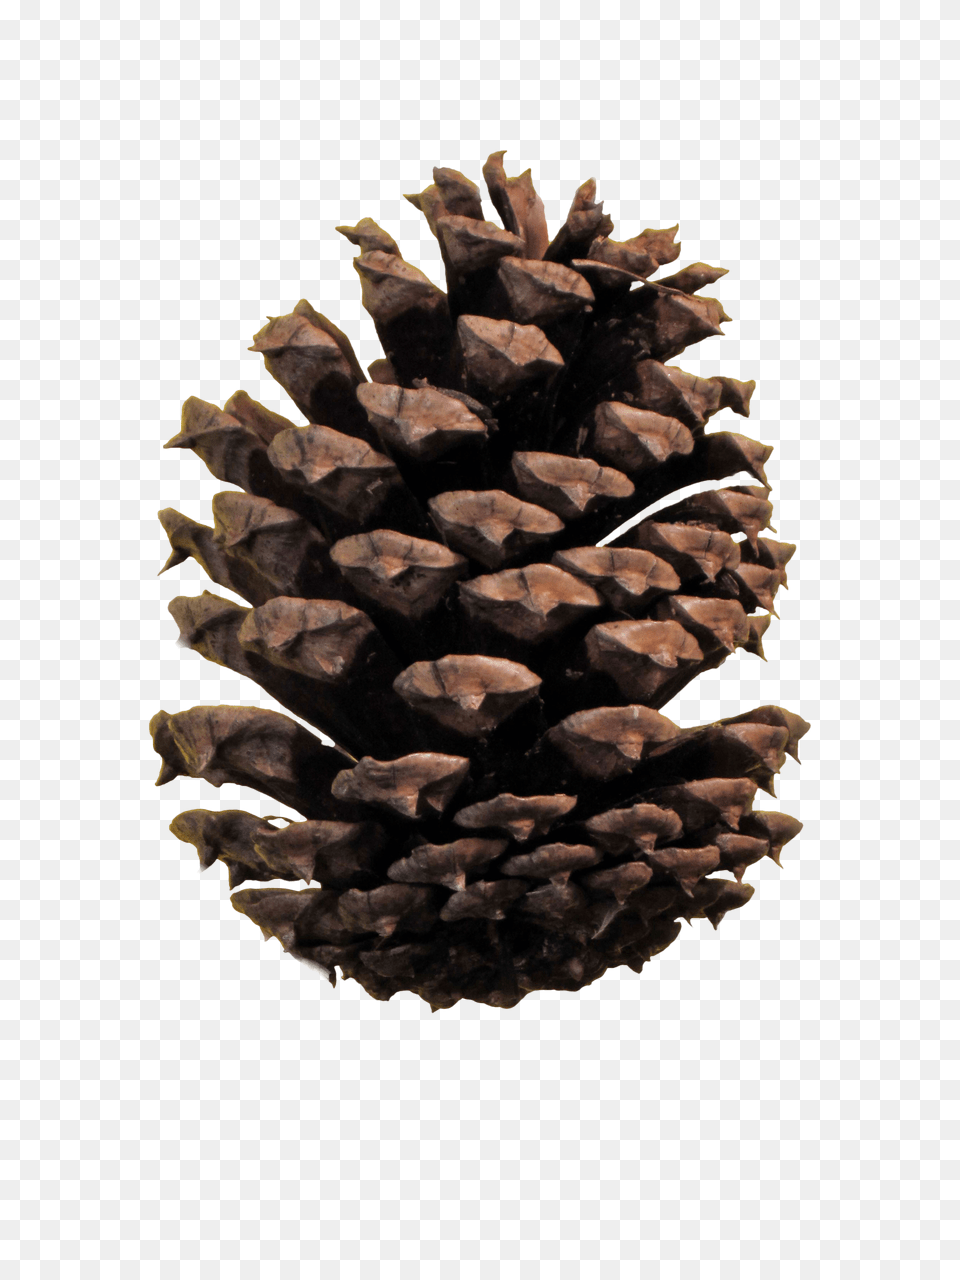 Pinecone Hd Transparent Pinecone Hd Images Free Png